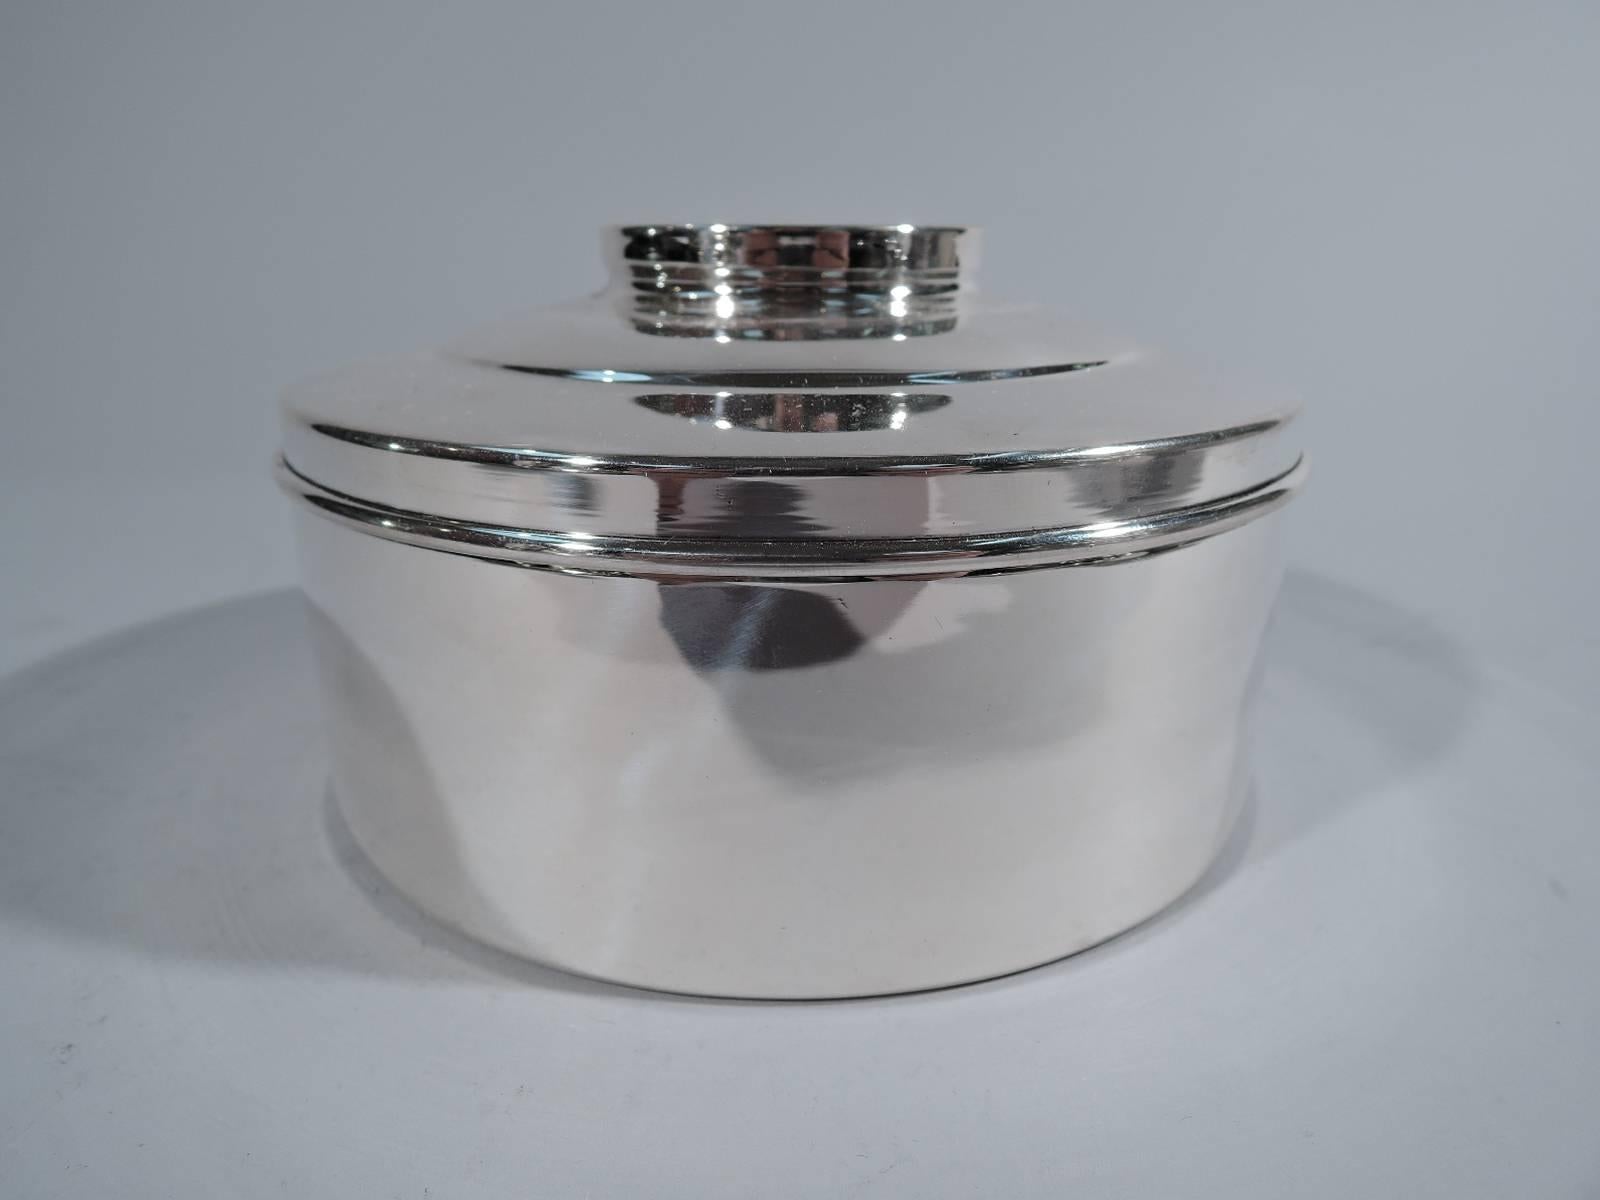 Charming sterling silver box. Round with straight sides. Cover stepped and inset with silver medal commemorating the marriage of Napoleon I to Marie Louise. On obverse are jugate busts of the emperor and his young bride. On reverse is a classical